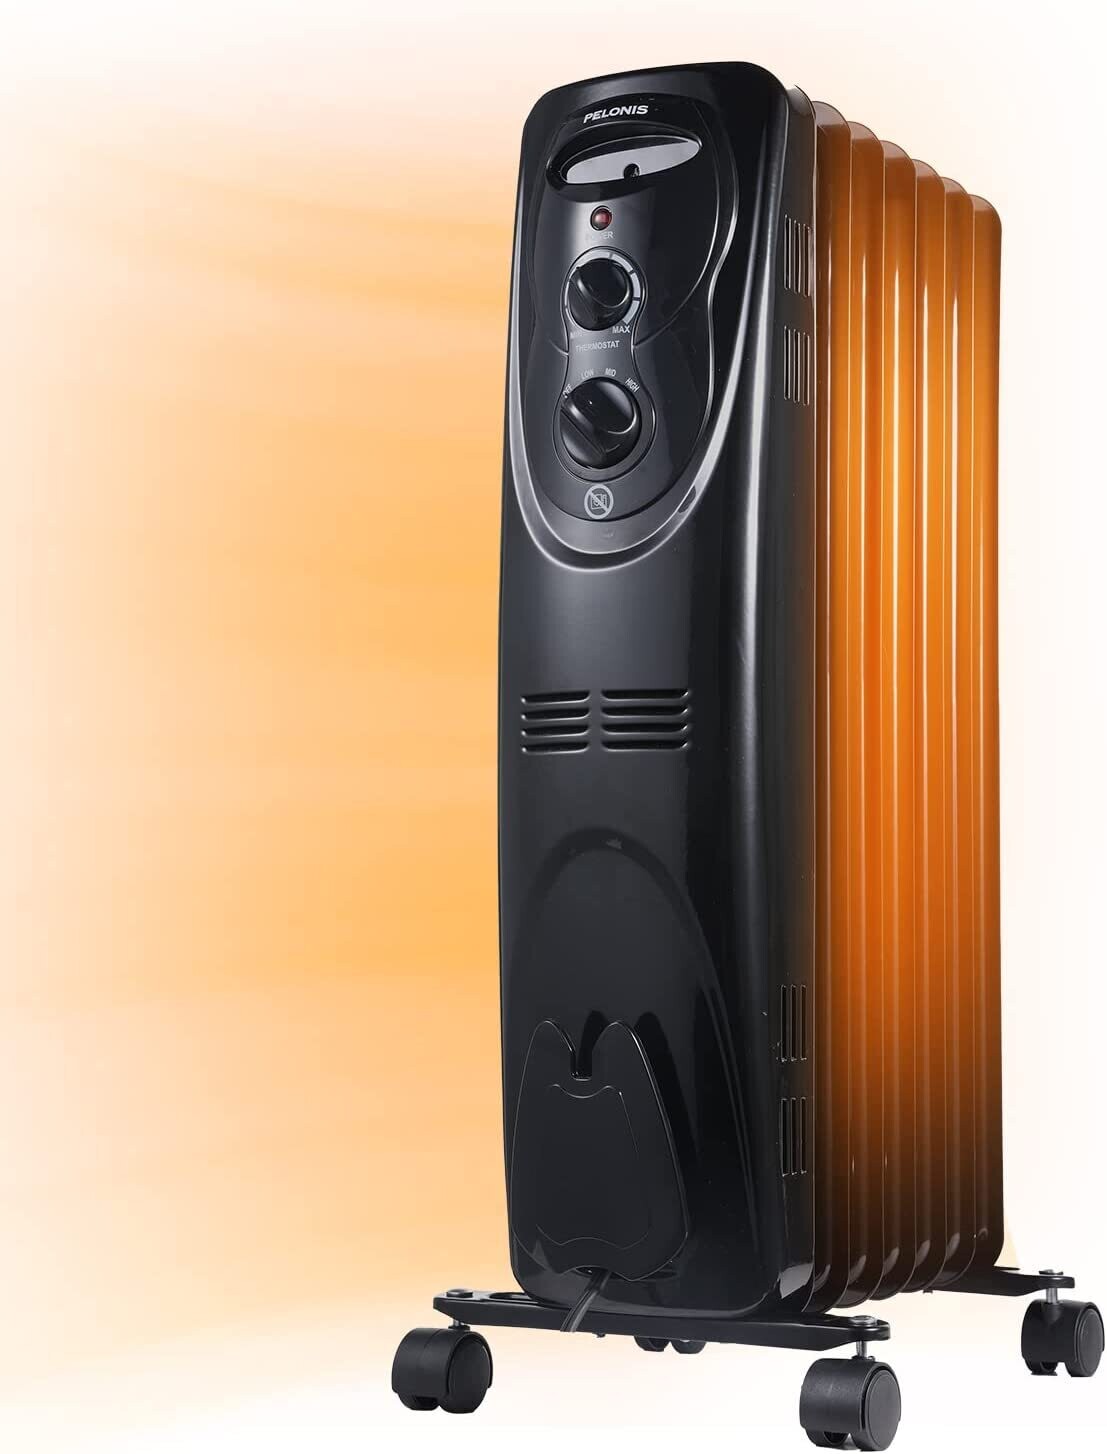 PELONIS PHO15A2AGB, Basic Electric Oil Filled Radiator [Black] Space Heater